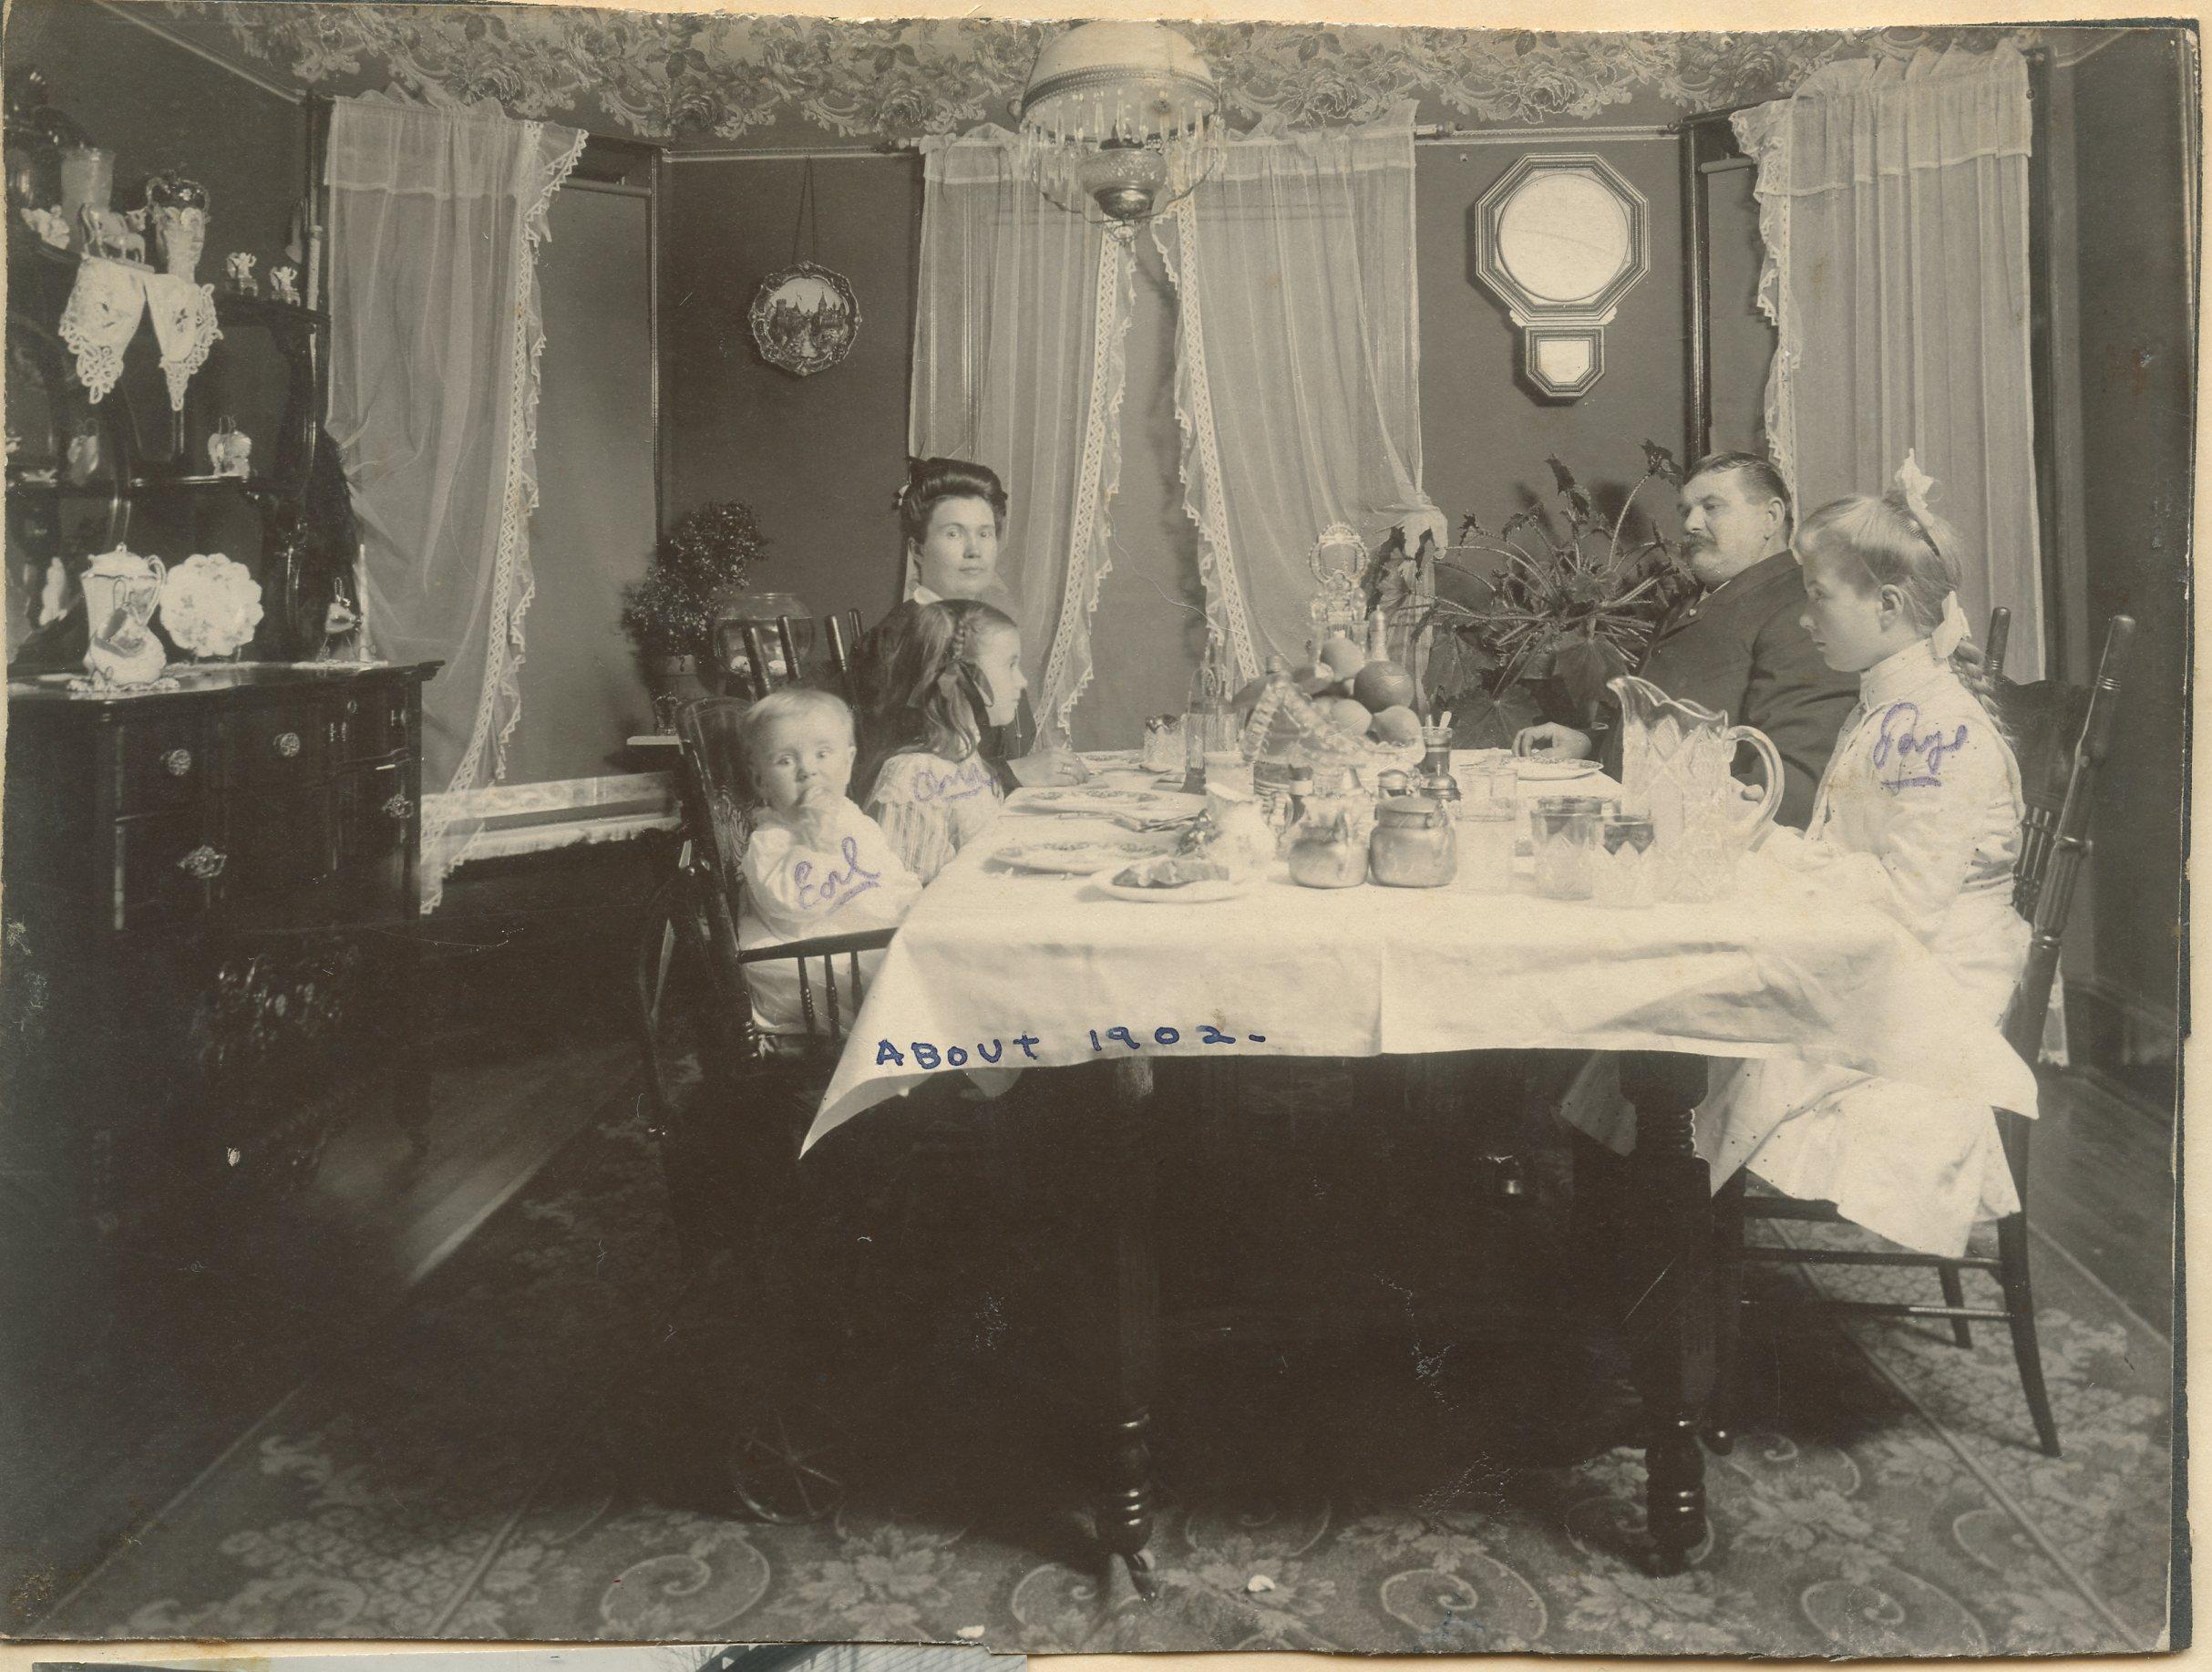 Portrait of Henry and Millie Fritz’s family at the dinner table.